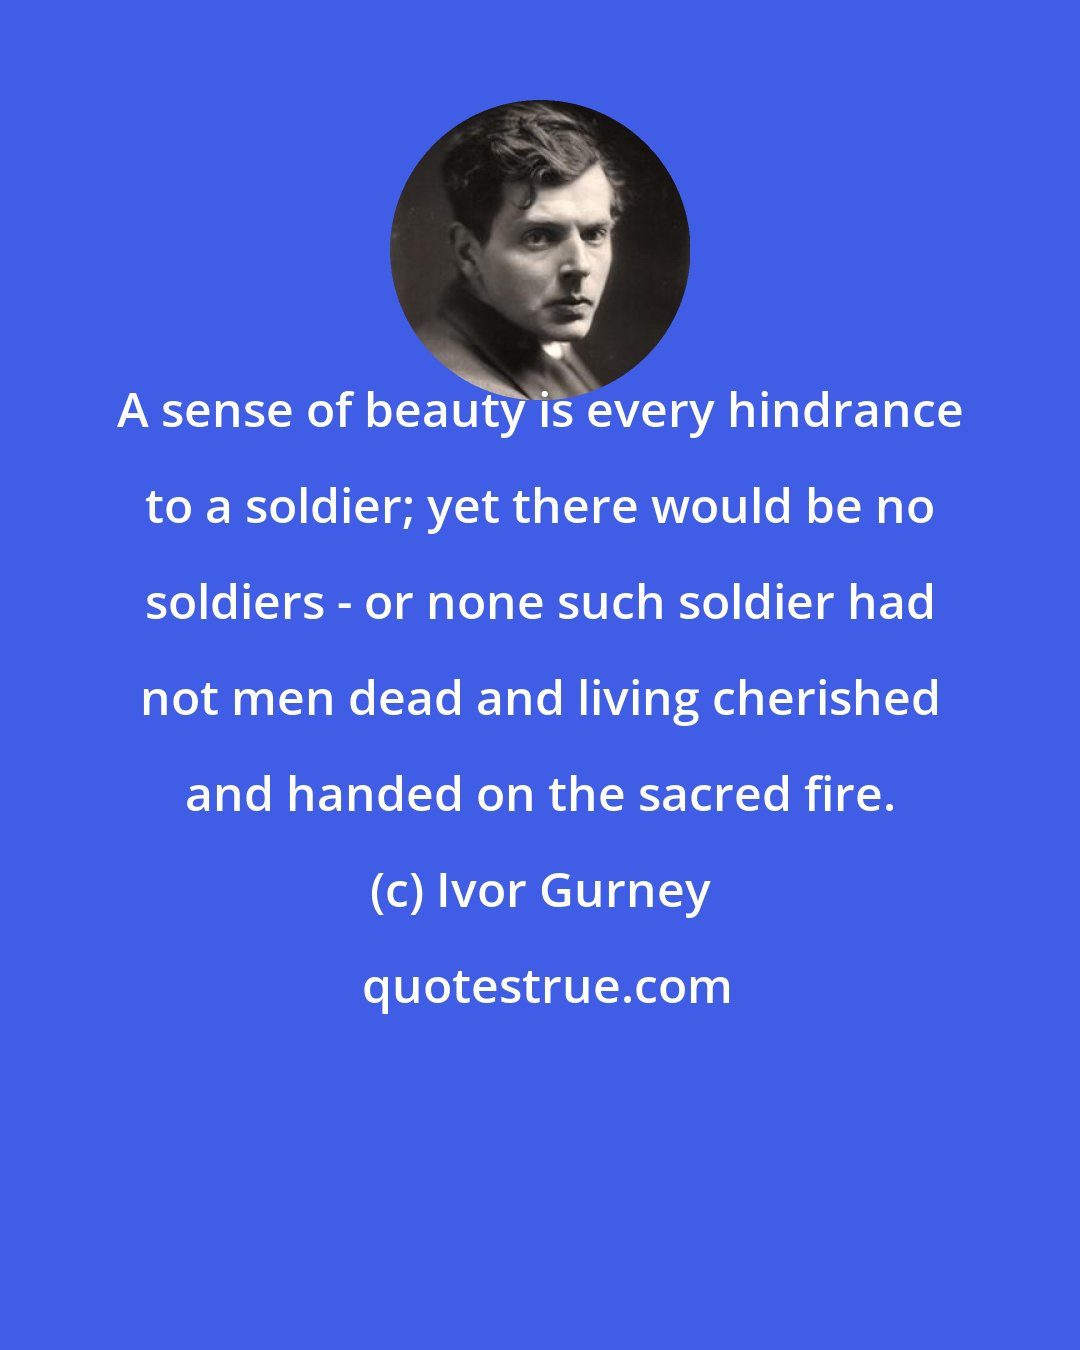 Ivor Gurney: A sense of beauty is every hindrance to a soldier; yet there would be no soldiers - or none such soldier had not men dead and living cherished and handed on the sacred fire.